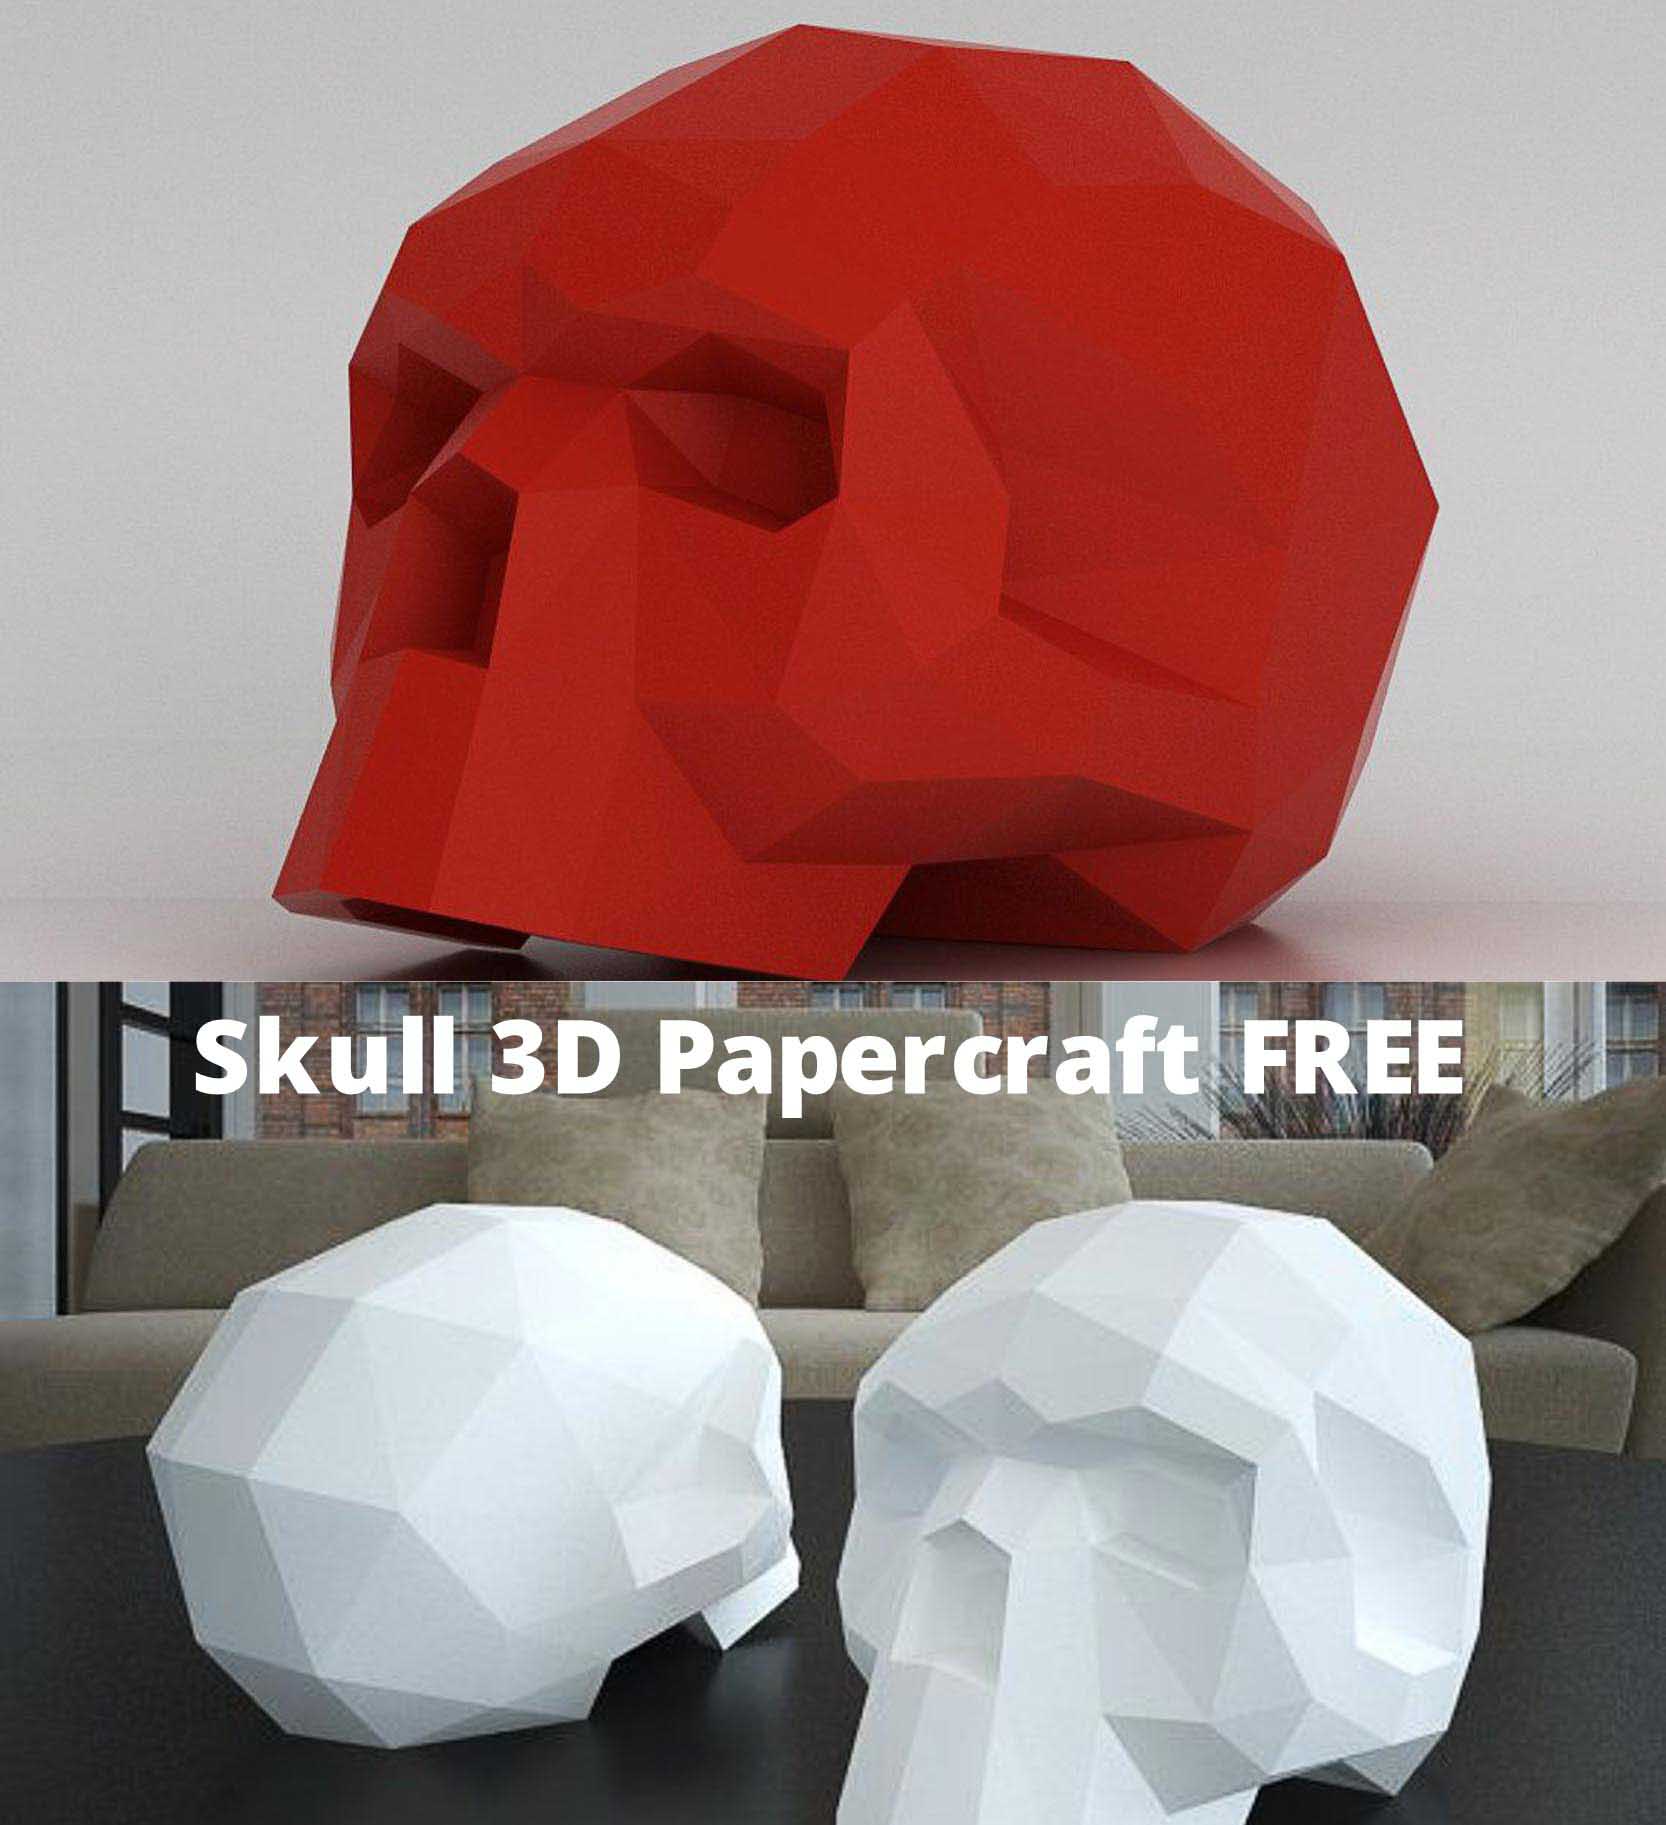 Introducing 3d paper model of human skull You can easily create paper